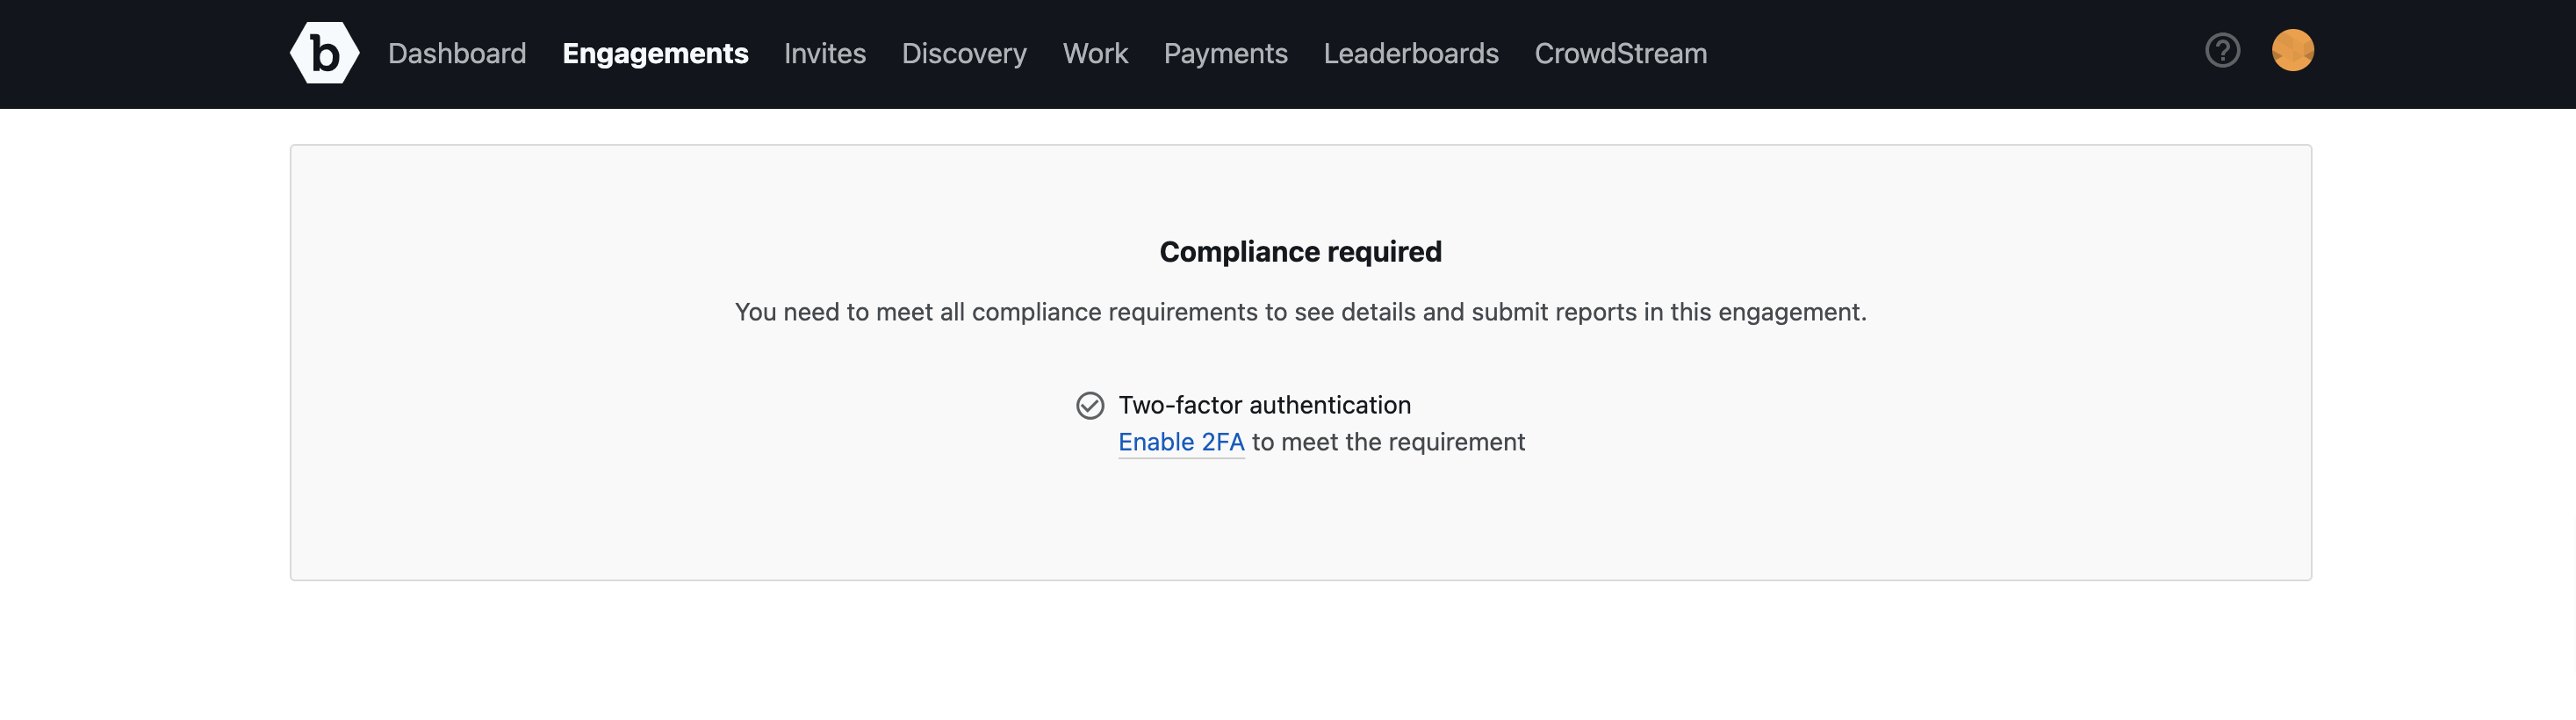 compliance-required